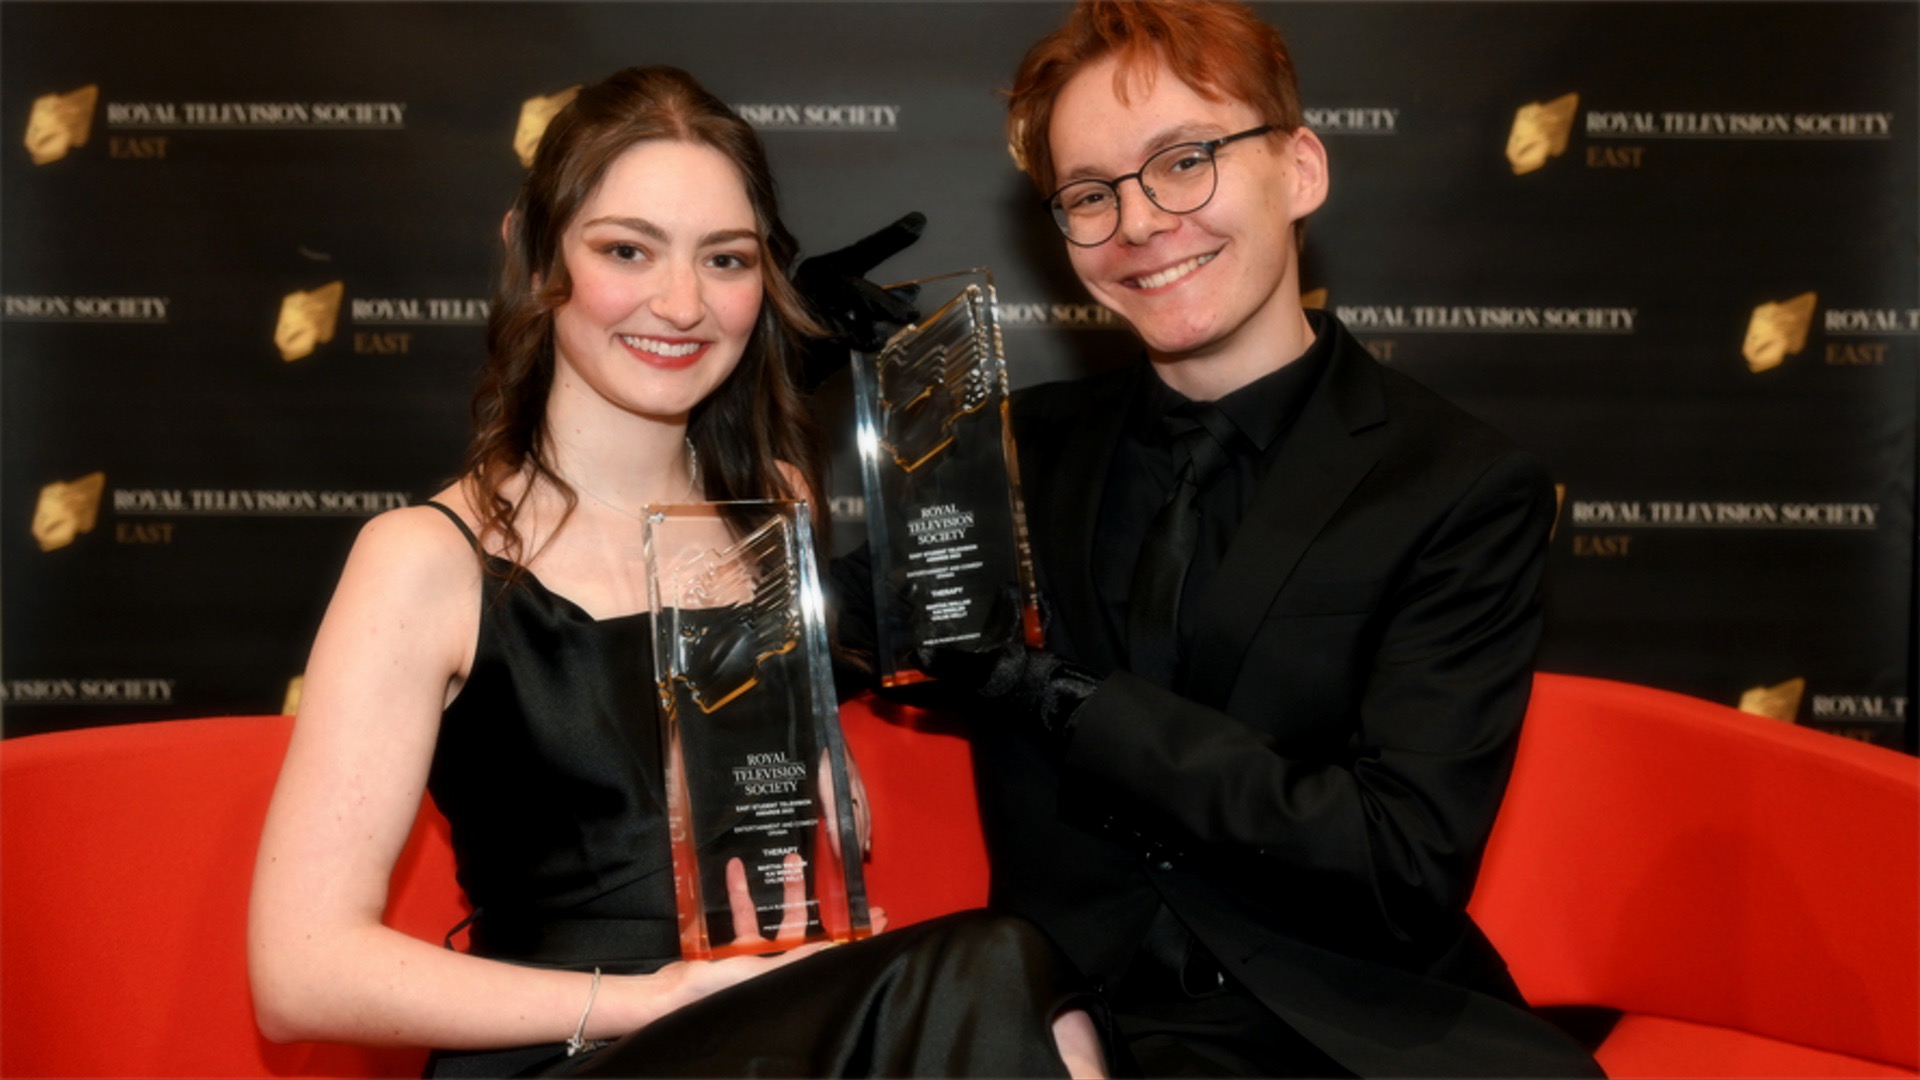 Director Martha Wallam and Producer Kai Wissler winning Best Comedy Drama at the RTS East Student Television Awards 2023